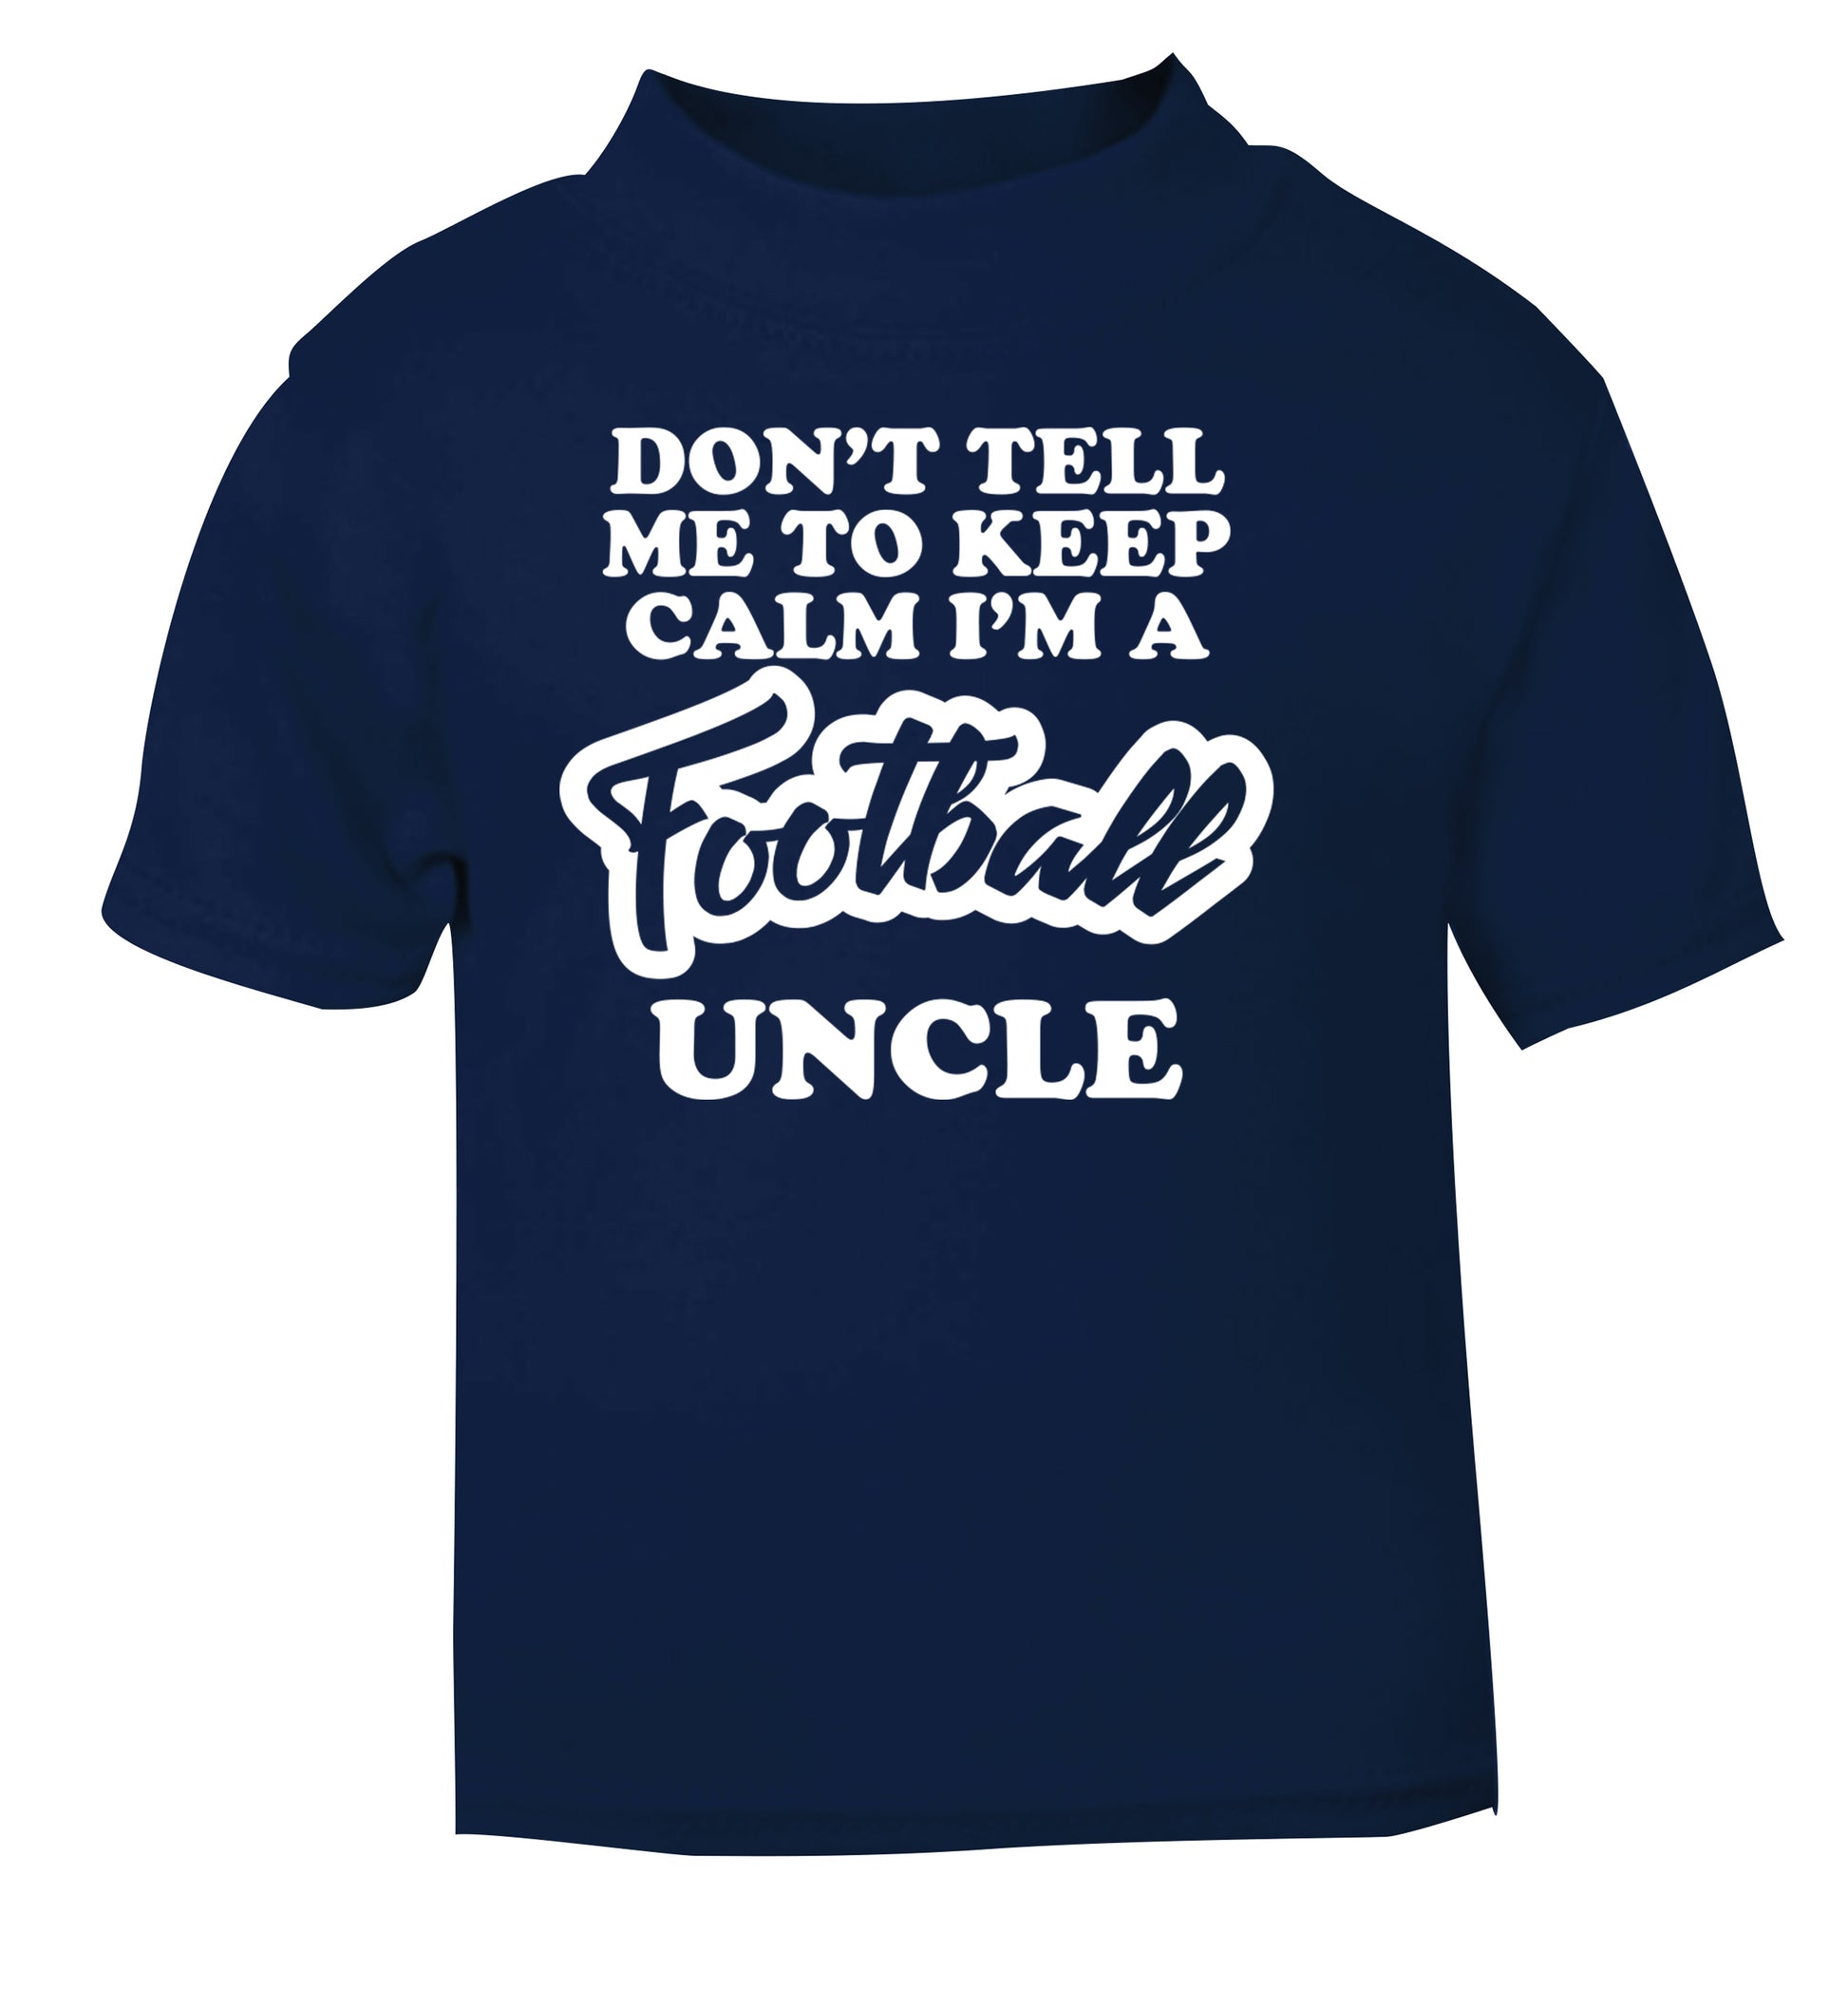 Don't tell me to keep calm I'm a football uncle navy Baby Toddler Tshirt 2 Years